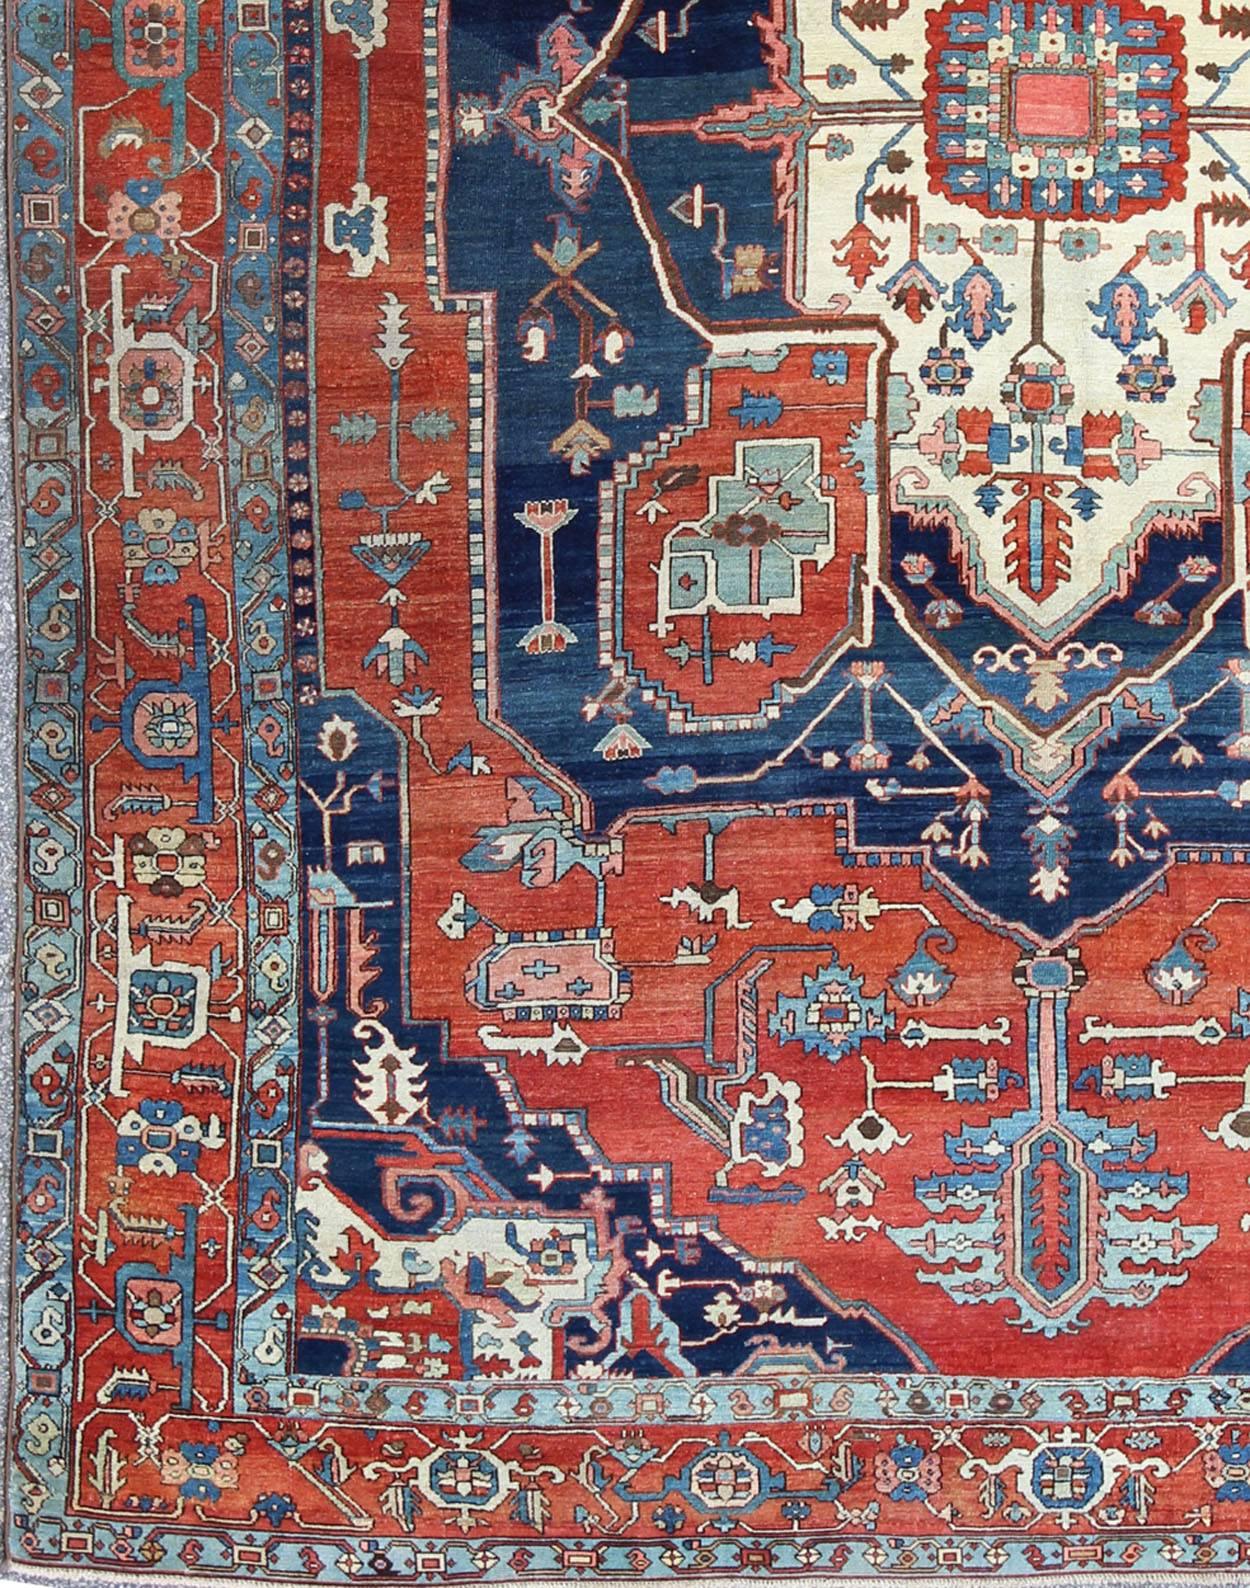 Antique Persian fine weave Serapi rug with large geometric medallion in brilliant colors and blue and tomato red. Keivan Woven Arts / Rug / N15-1204 / country of origin / type: Iran /Serapi, circa 1900. 
Measures: 10.3 x 14.4.
Antique Serapi rugs